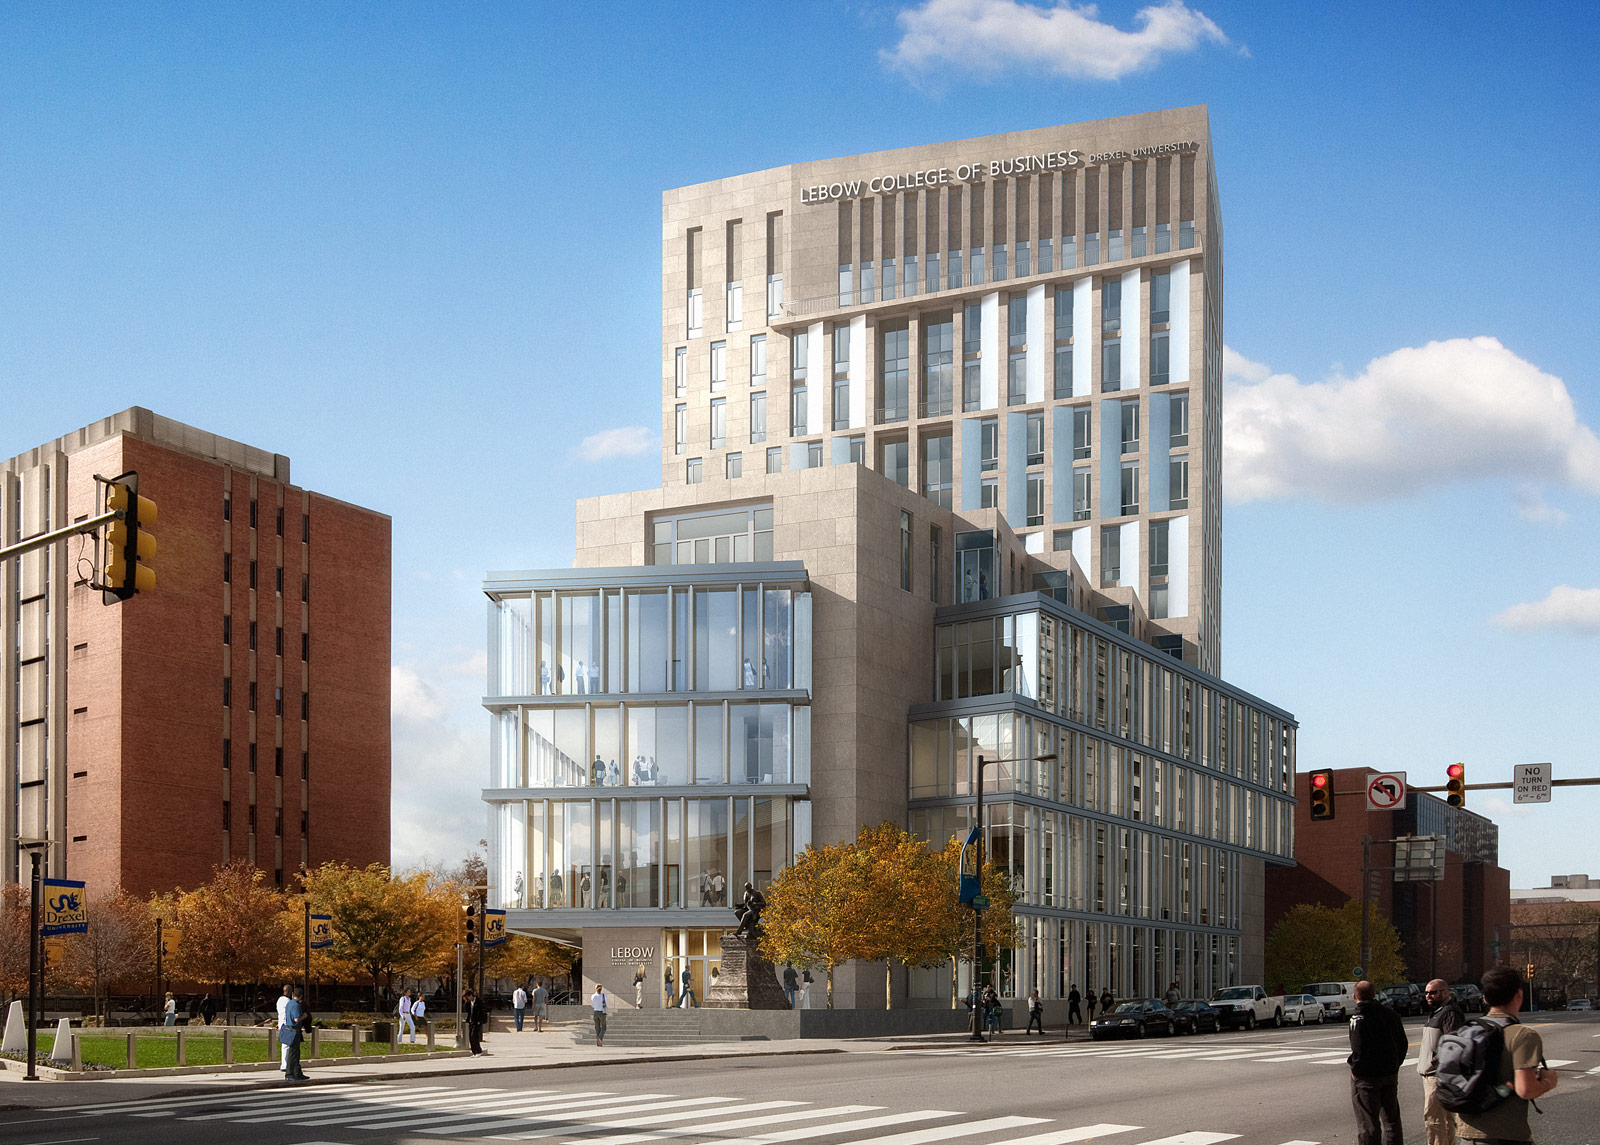 New Lebow College of Business from Market Street | Drexel University